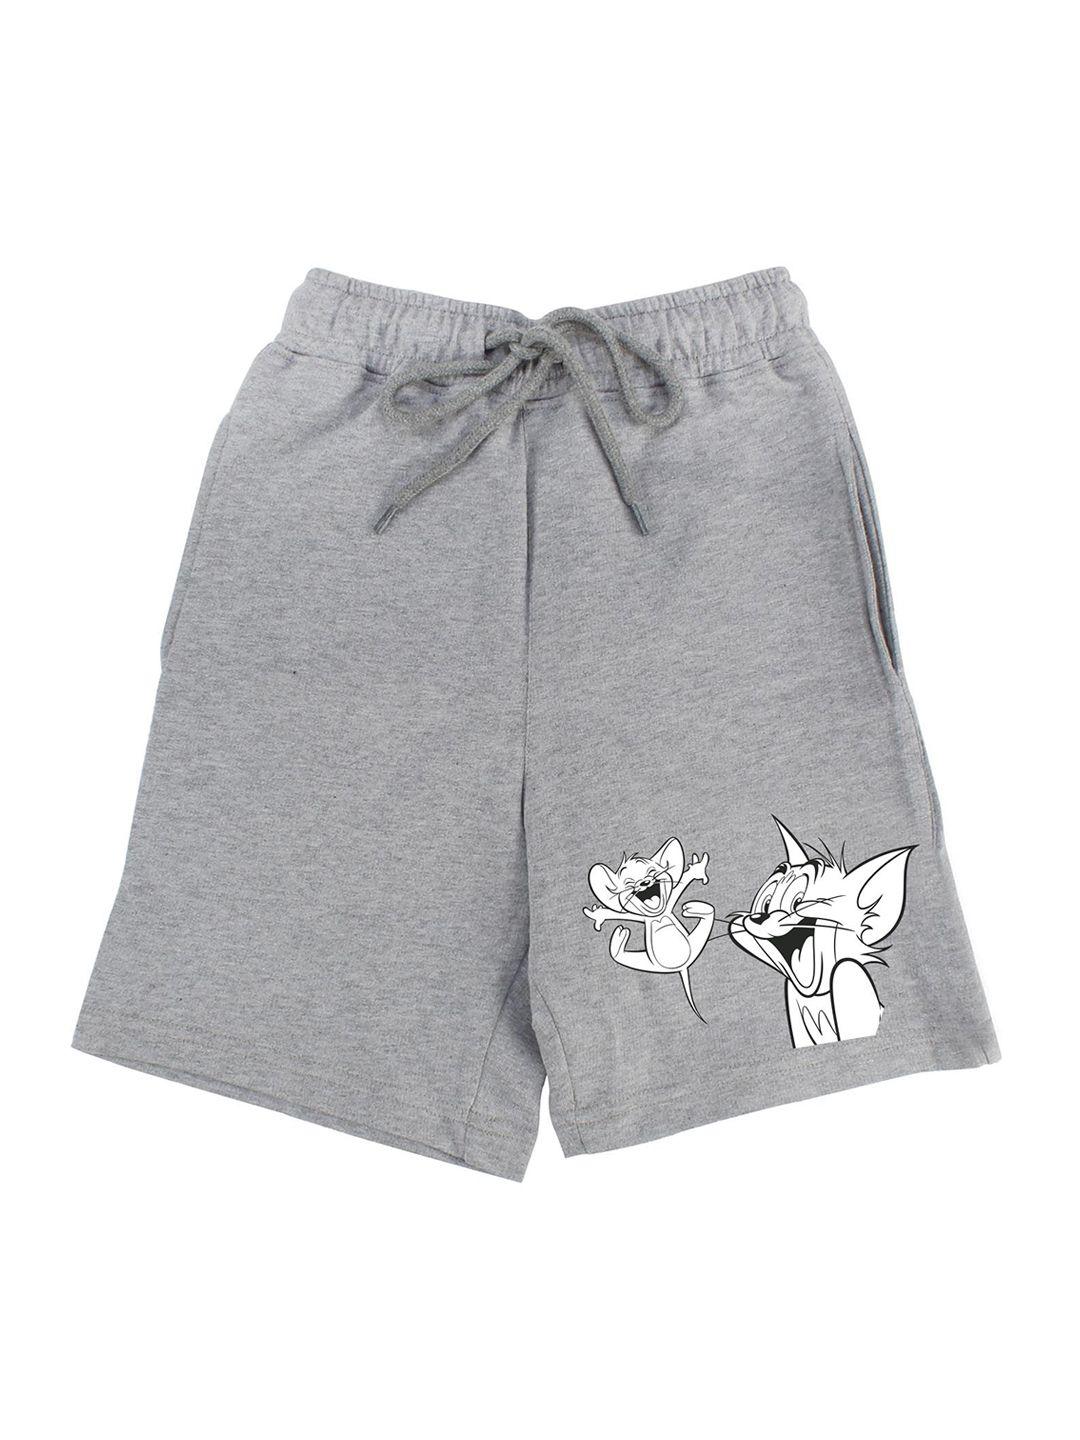 tom-&-jerry-by-wear-your-mind-boys-grey-printed-tom-&-jerry-shorts